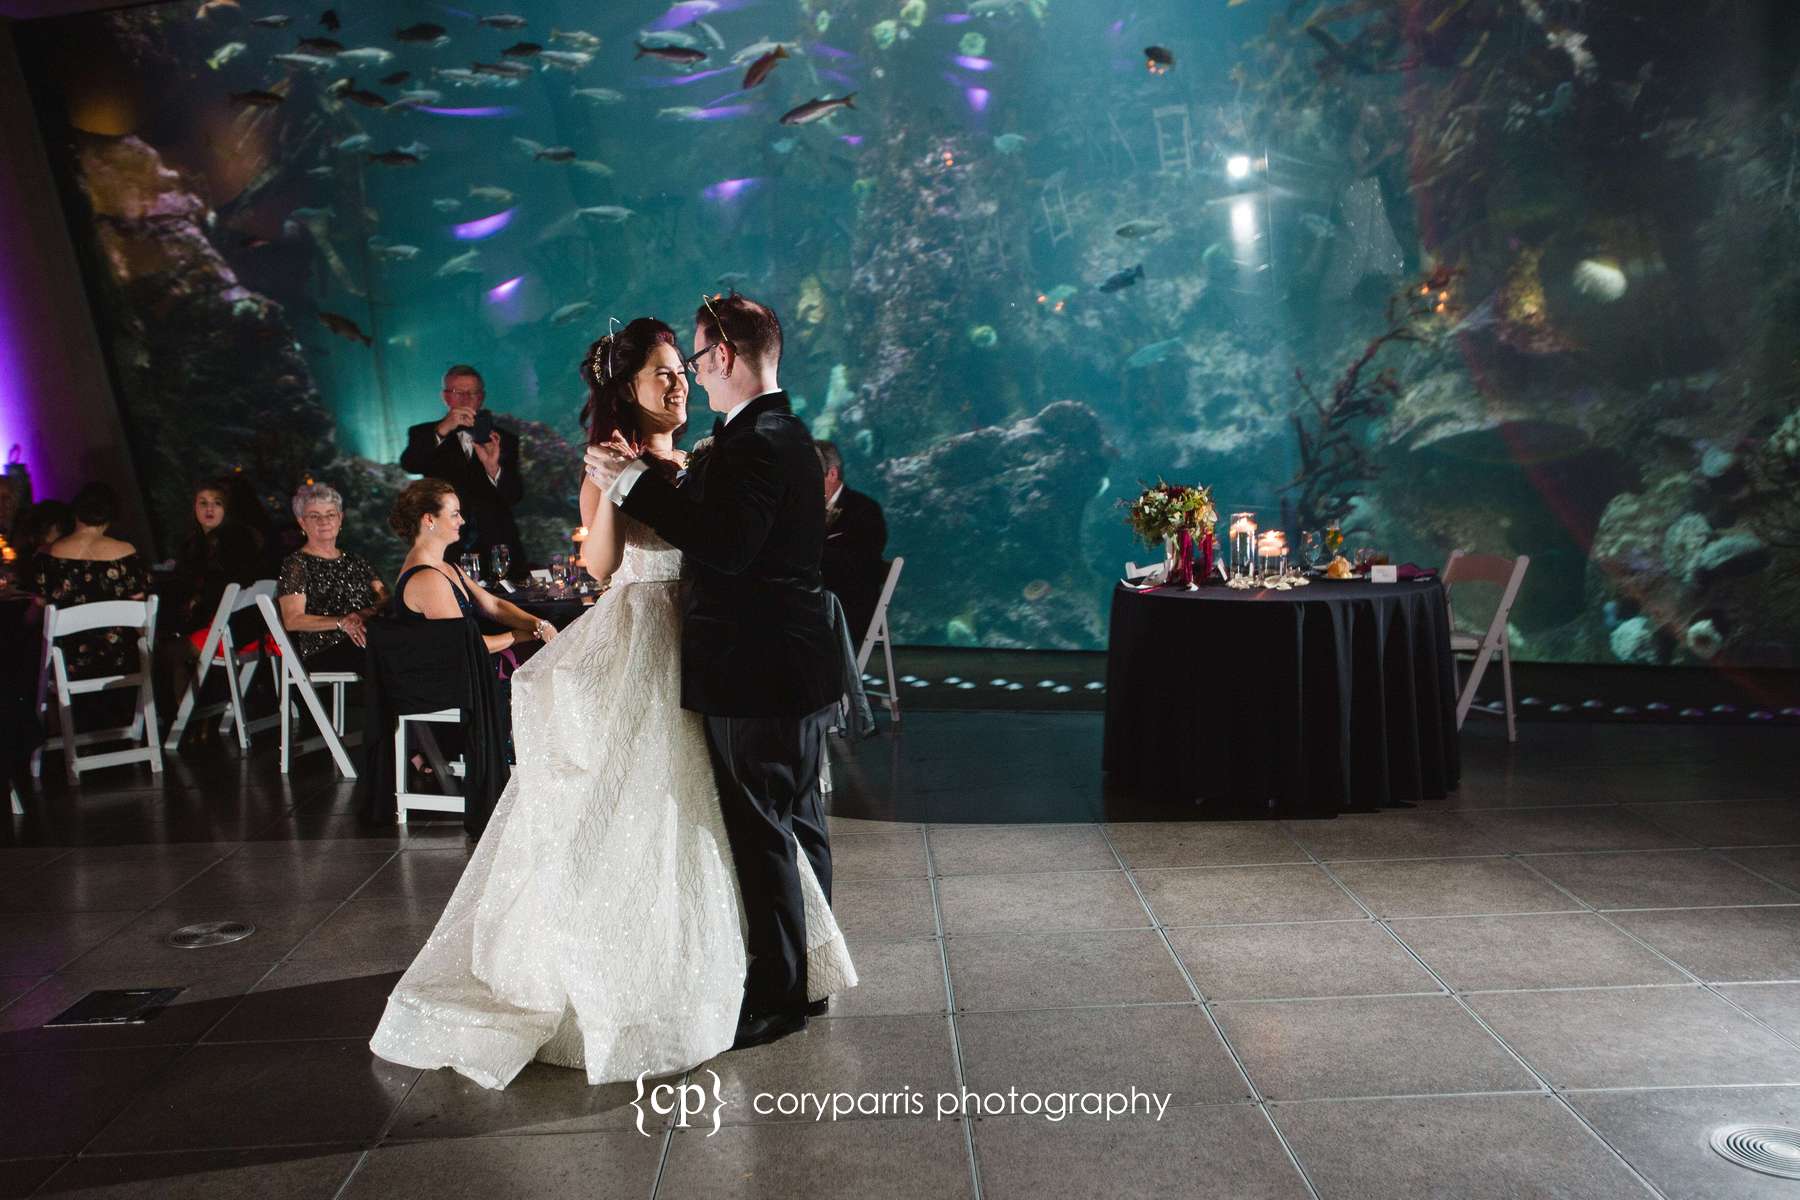 First dance with the big tank at the Seattle Aquarium in the background. 